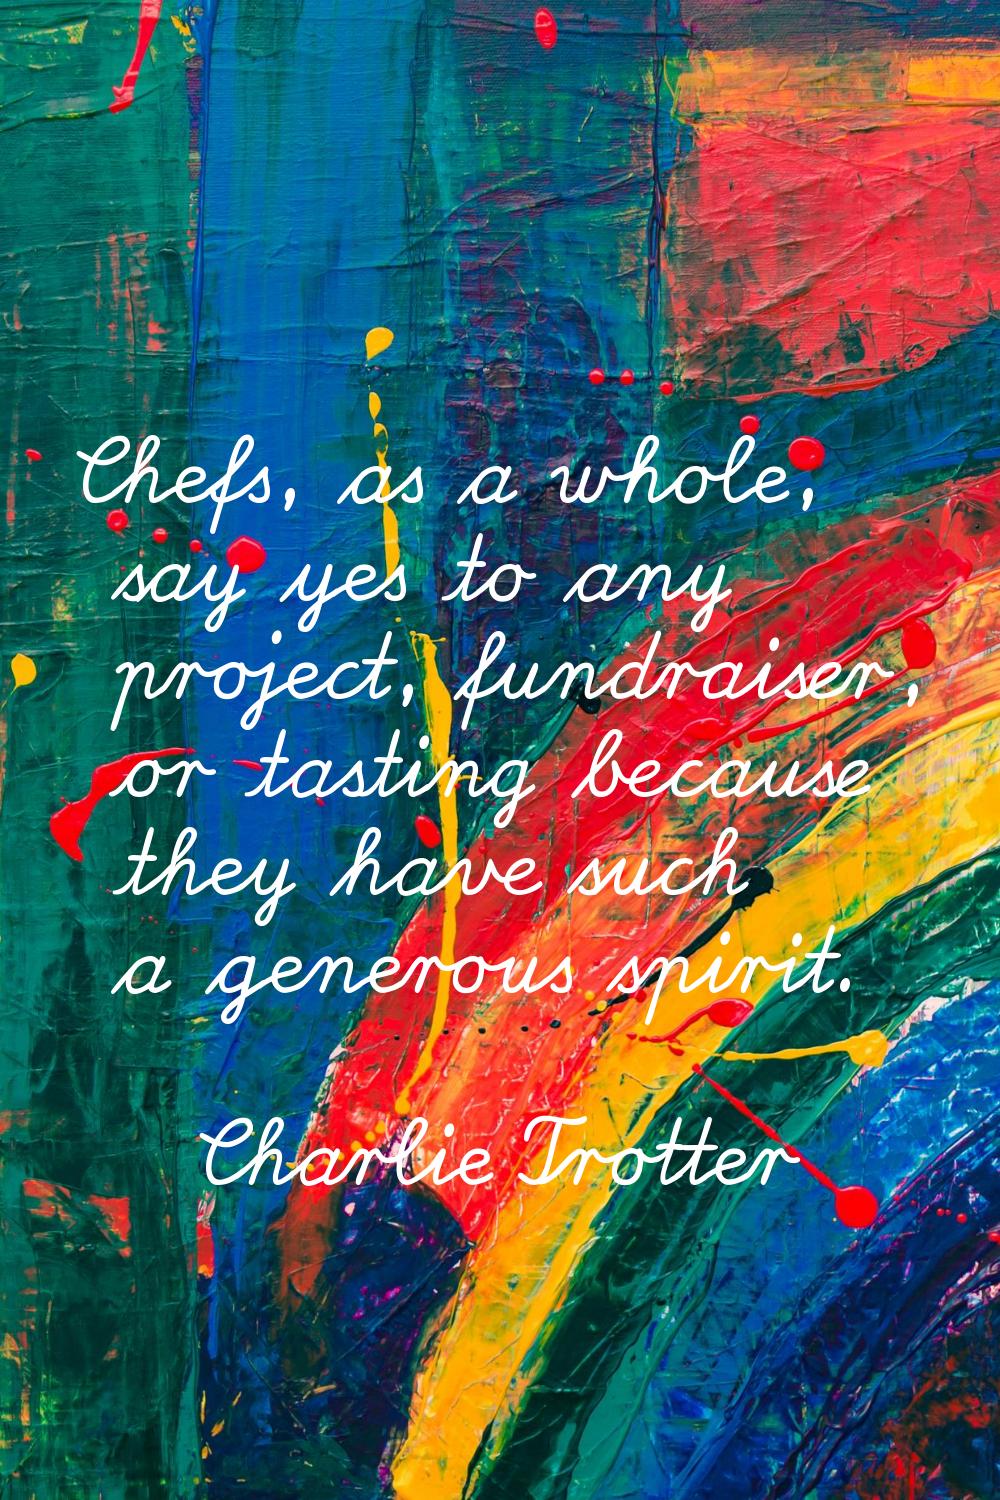 Chefs, as a whole, say yes to any project, fundraiser, or tasting because they have such a generous